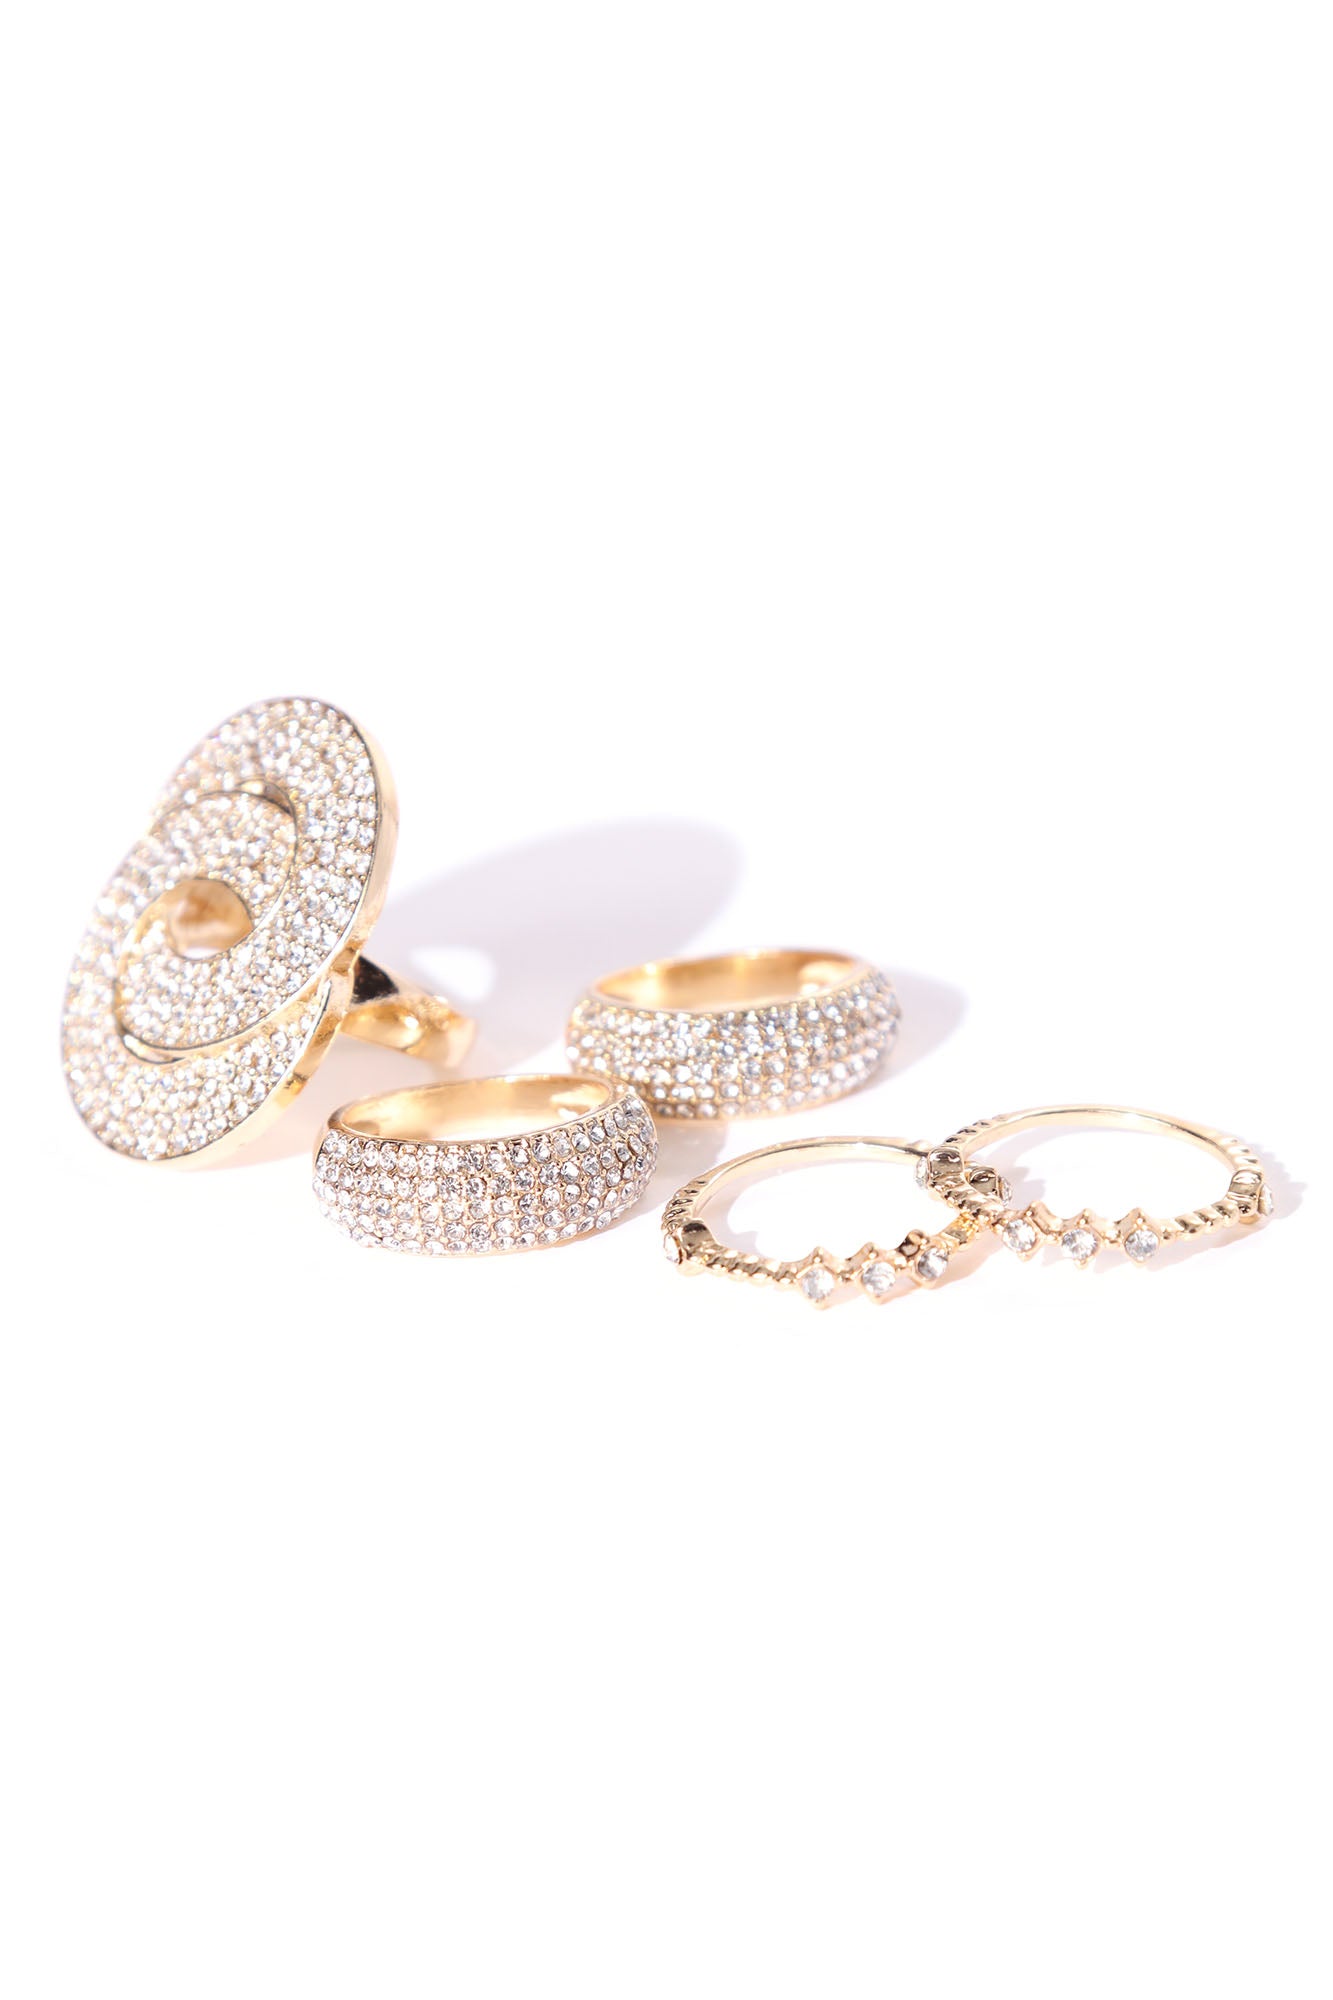 You Want Me 5 Piece Ring Set - Gold